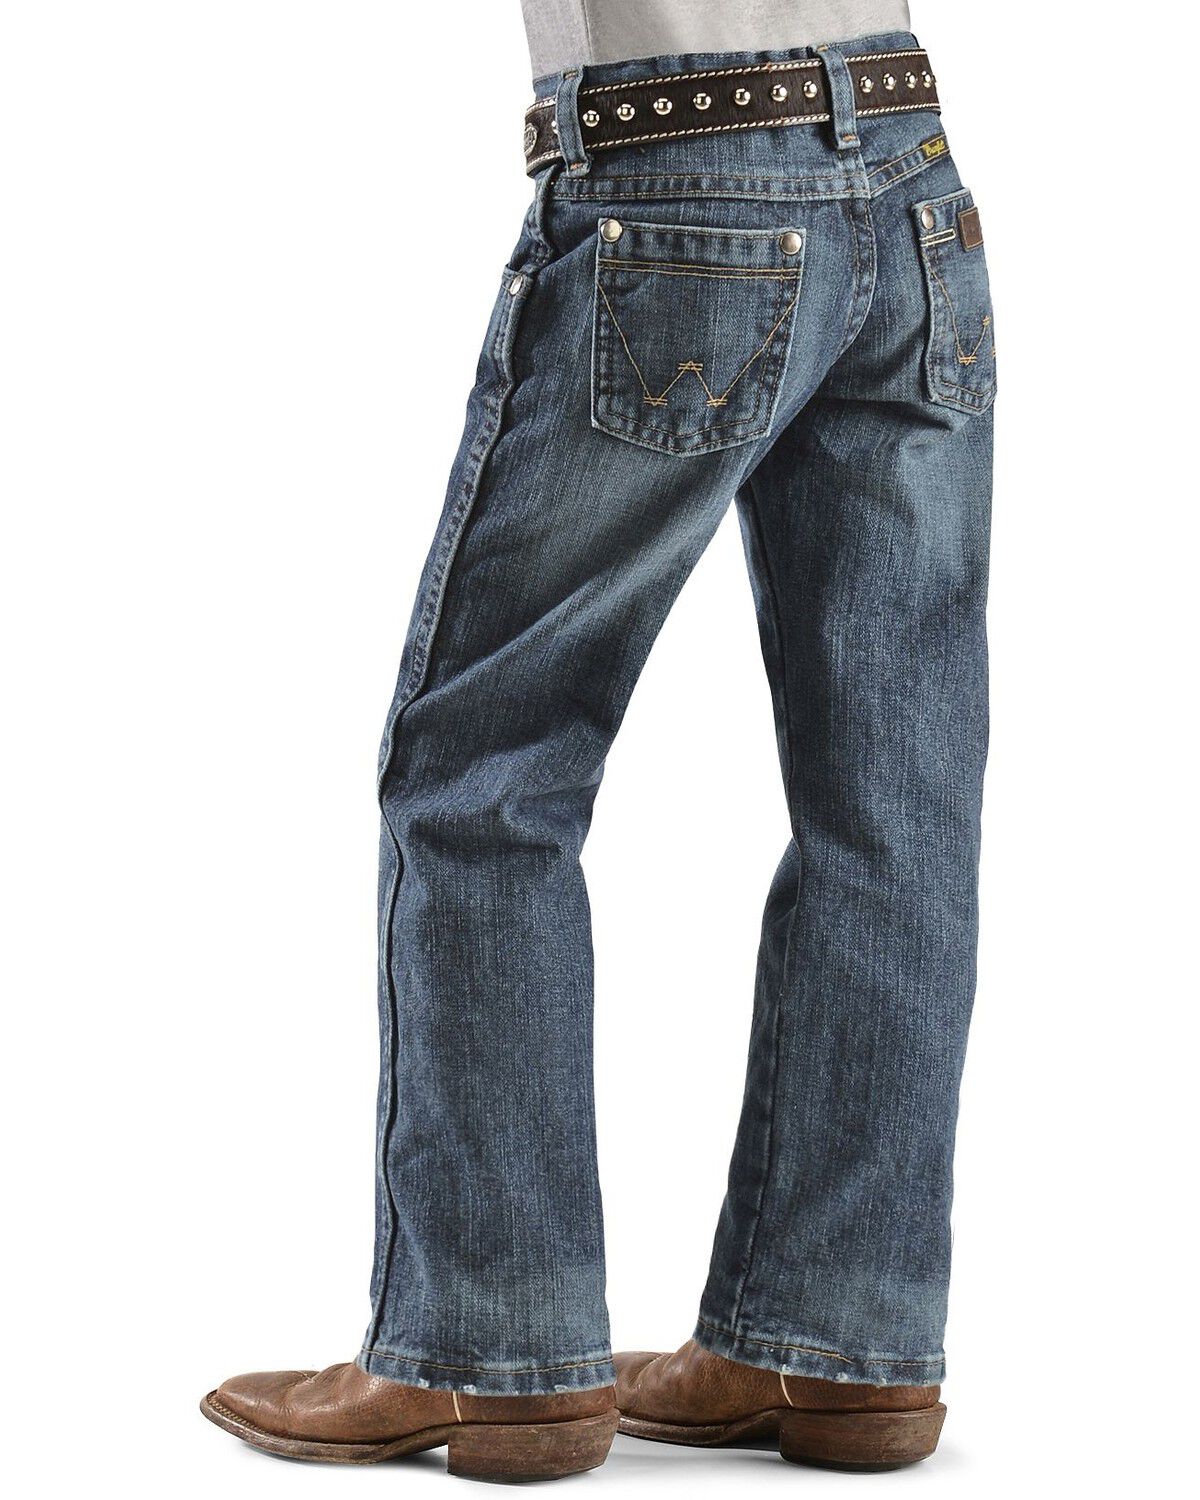 Wrangler Boys/’ Retro Relaxed Fit Boot Cut Jeans